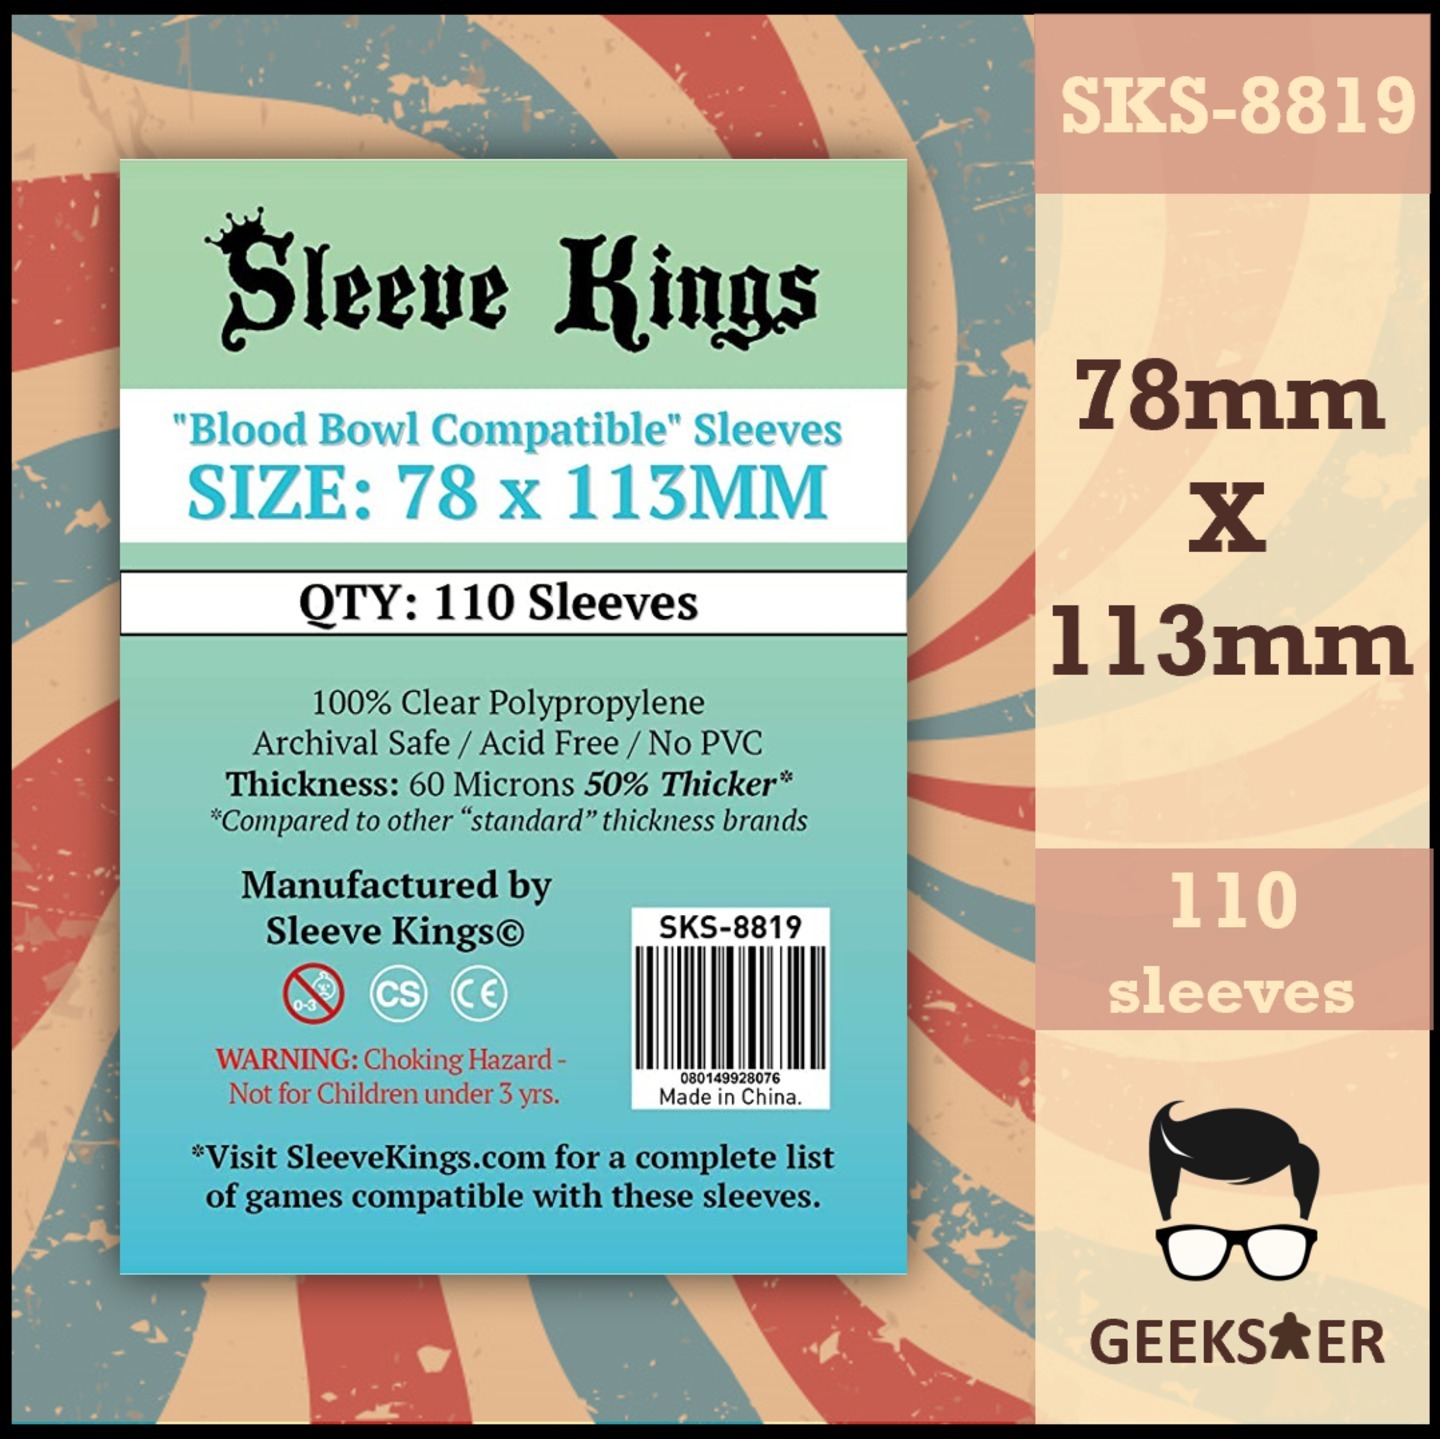 8819 Sleeve Kings Blood Bowl Compatible 78 X 113mm